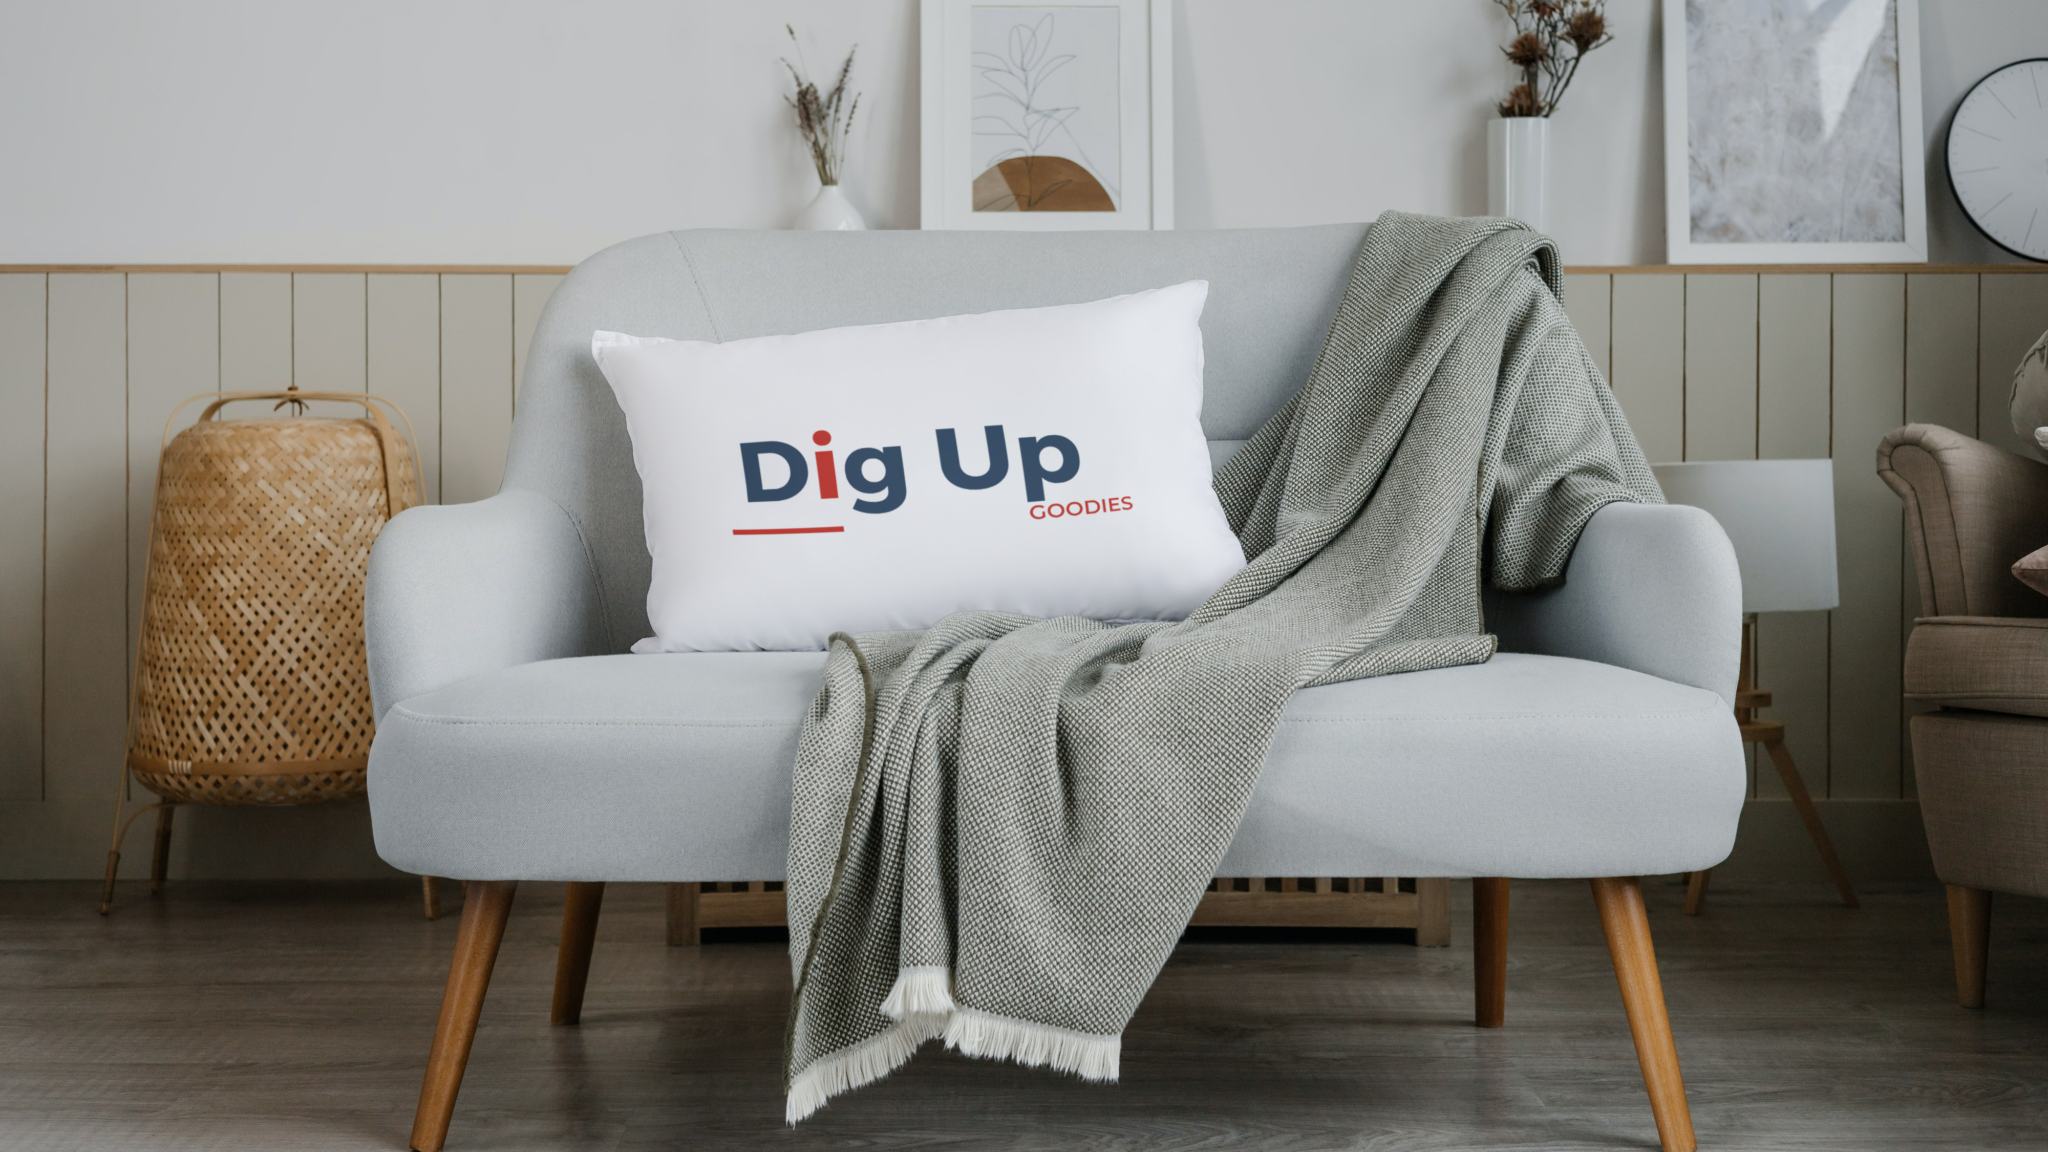 Rectangular pillow on the gray couch_Dig_Up-removebg-preview